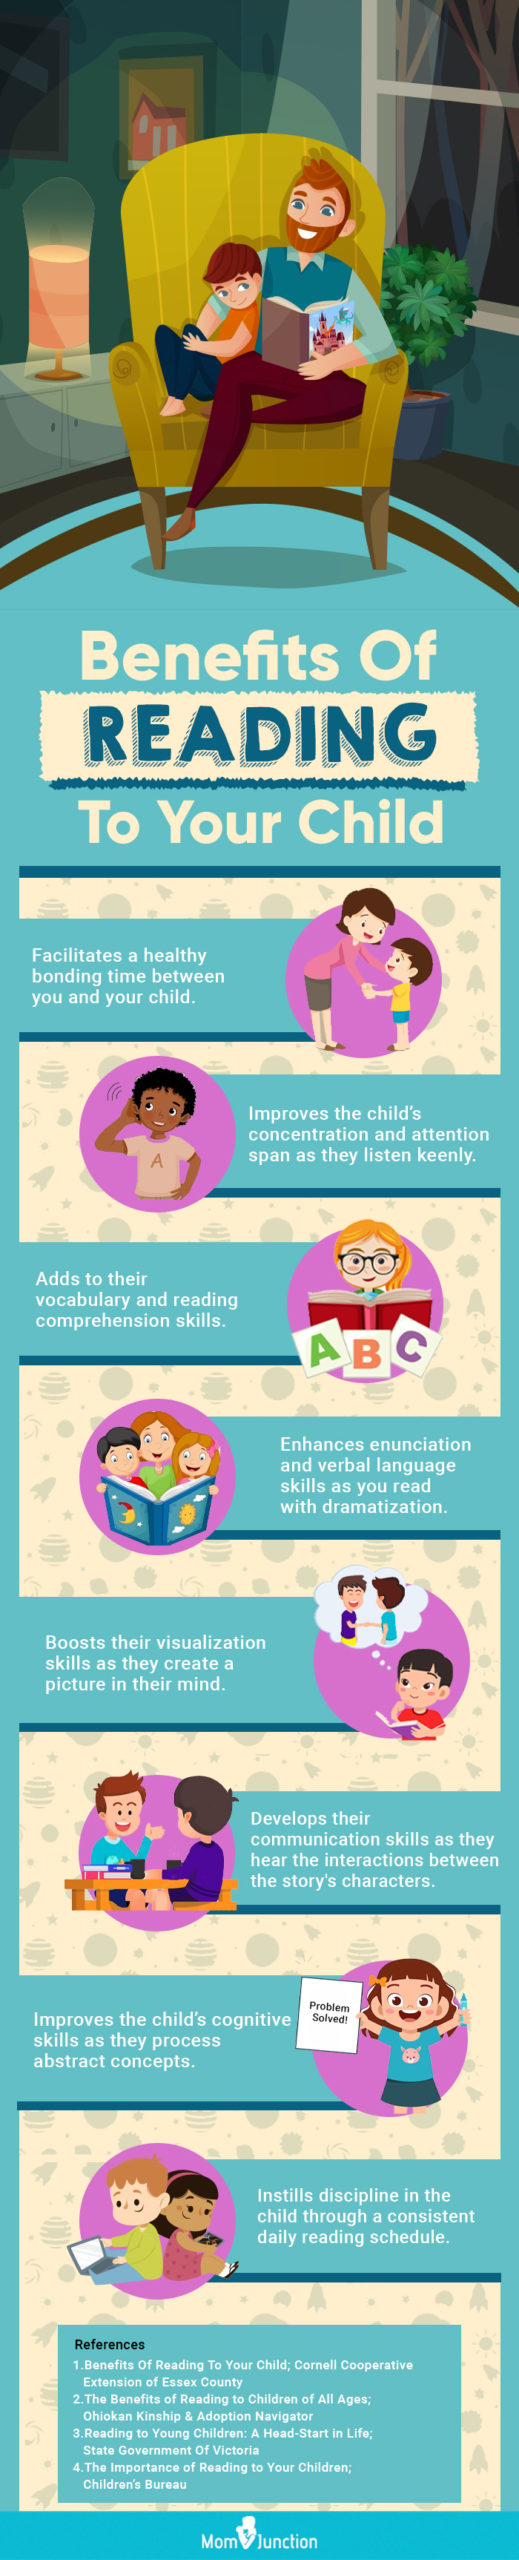 Benefits Of Reading To Your Child (infographic)